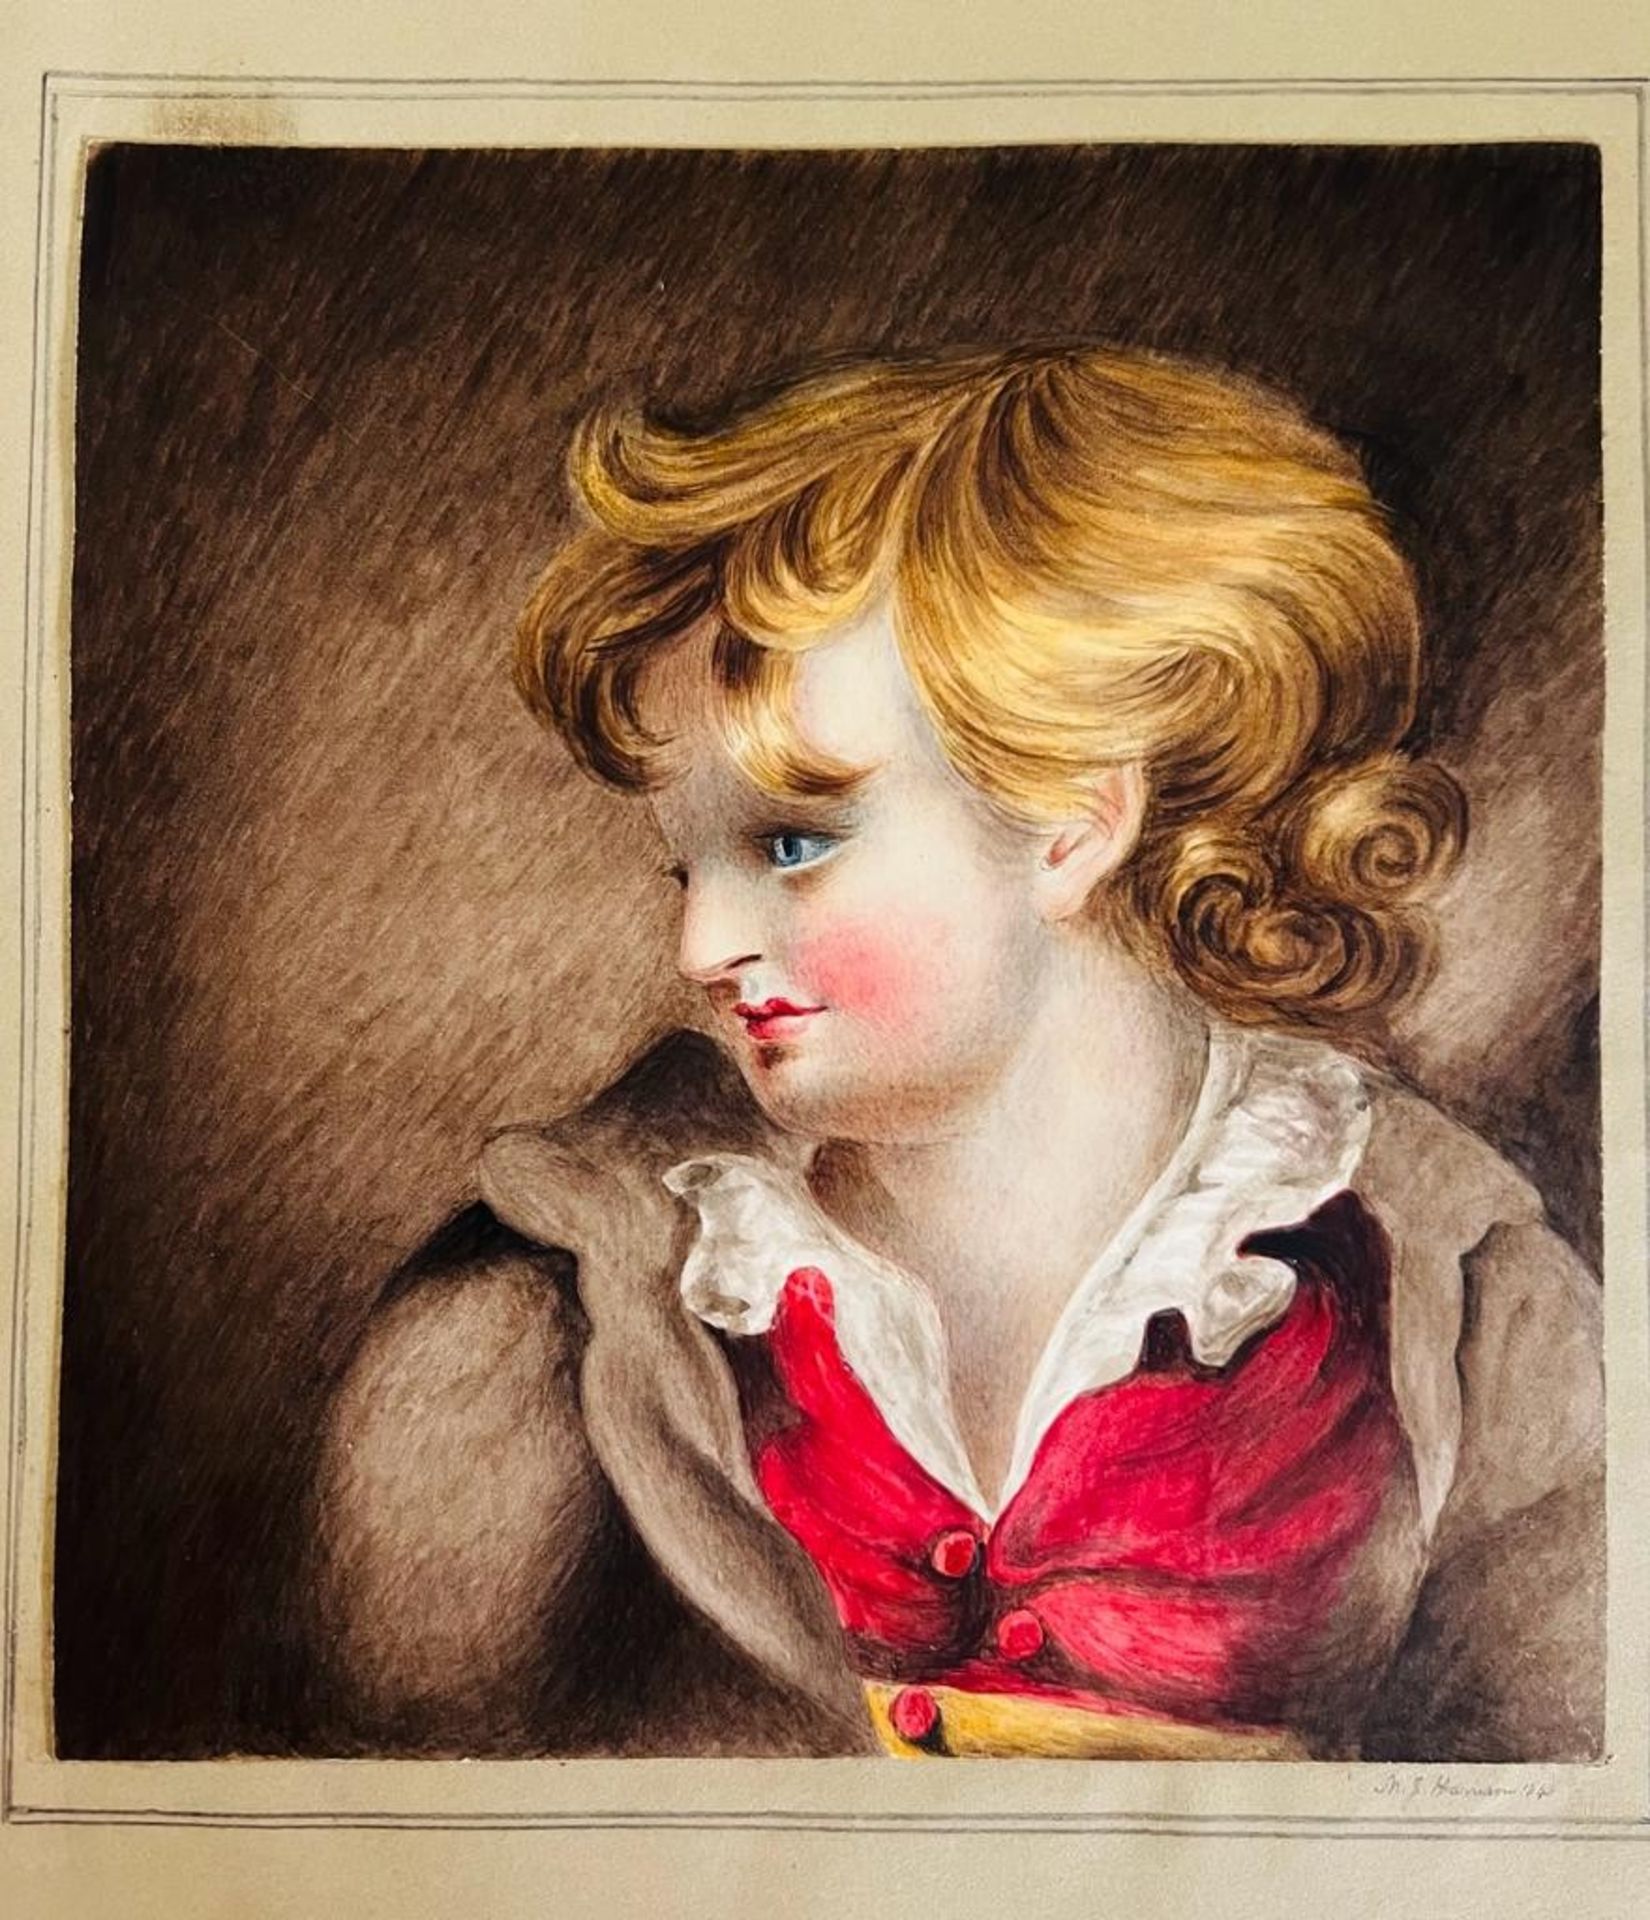 PORTFOLIO OF DRAWINGS AND WATERCOLOURS, SOME SIGNED, MJ HARRISON CIRCA 1843, JC HARRISON 1867,